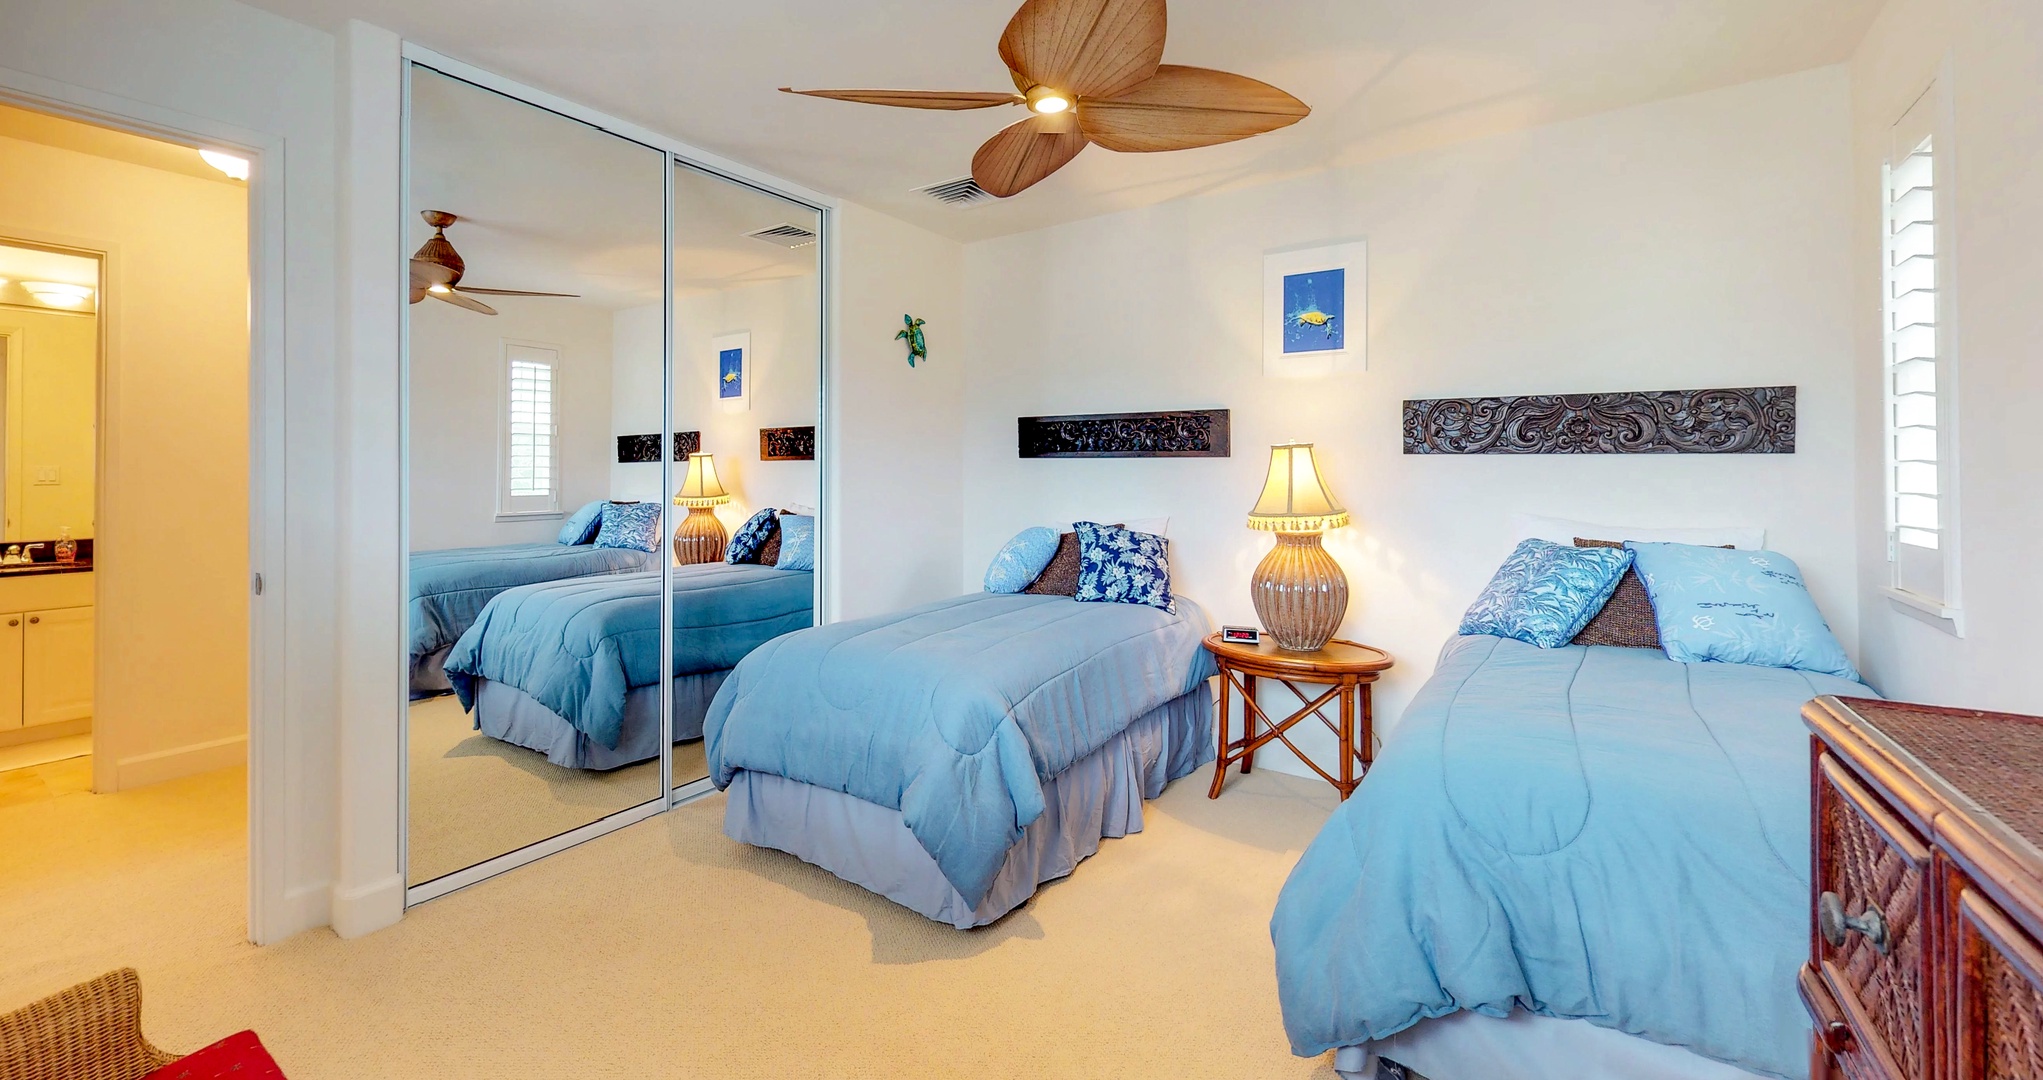 Kapolei Vacation Rentals, Ko Olina Kai 1105E - Bedroom with twin beds with soft, blue linens